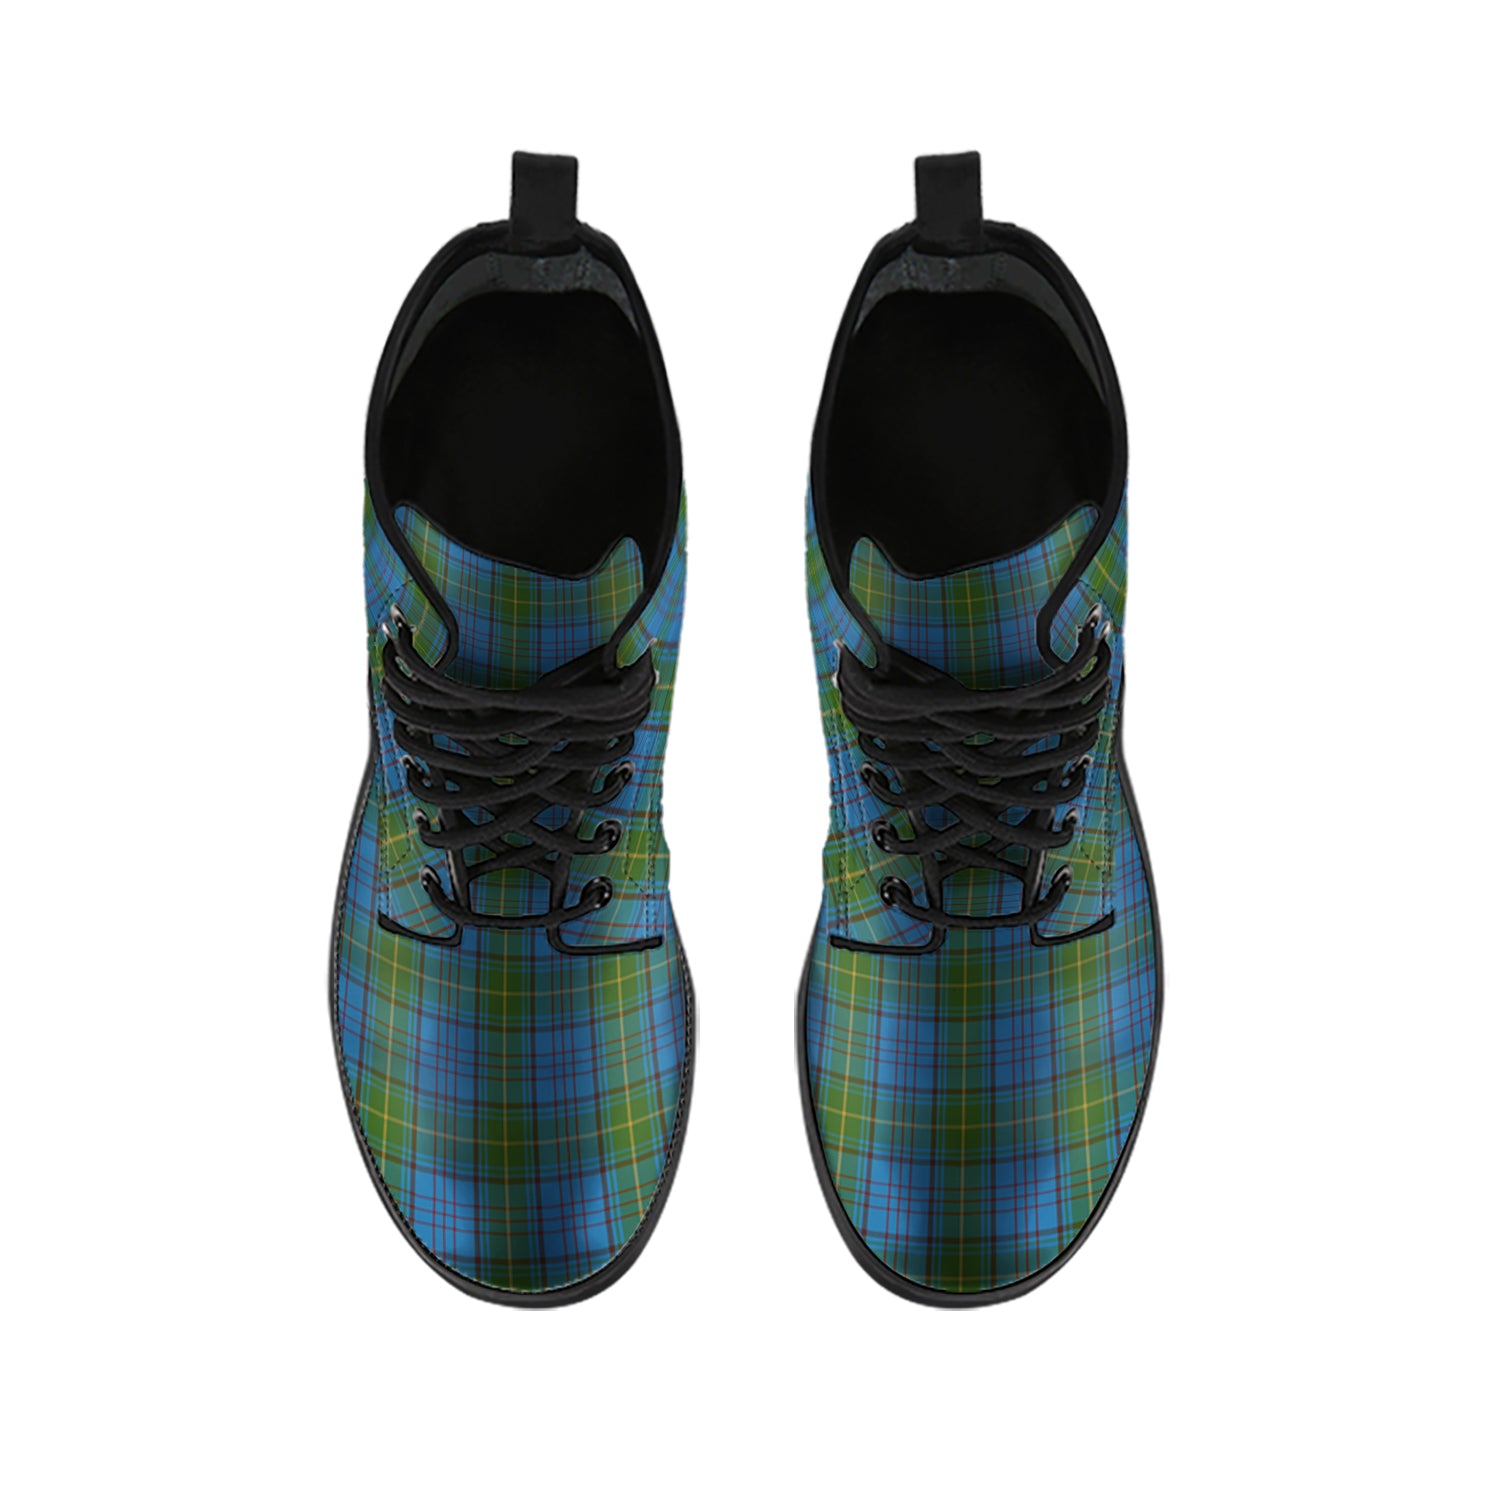 donegal-tartan-leather-boots